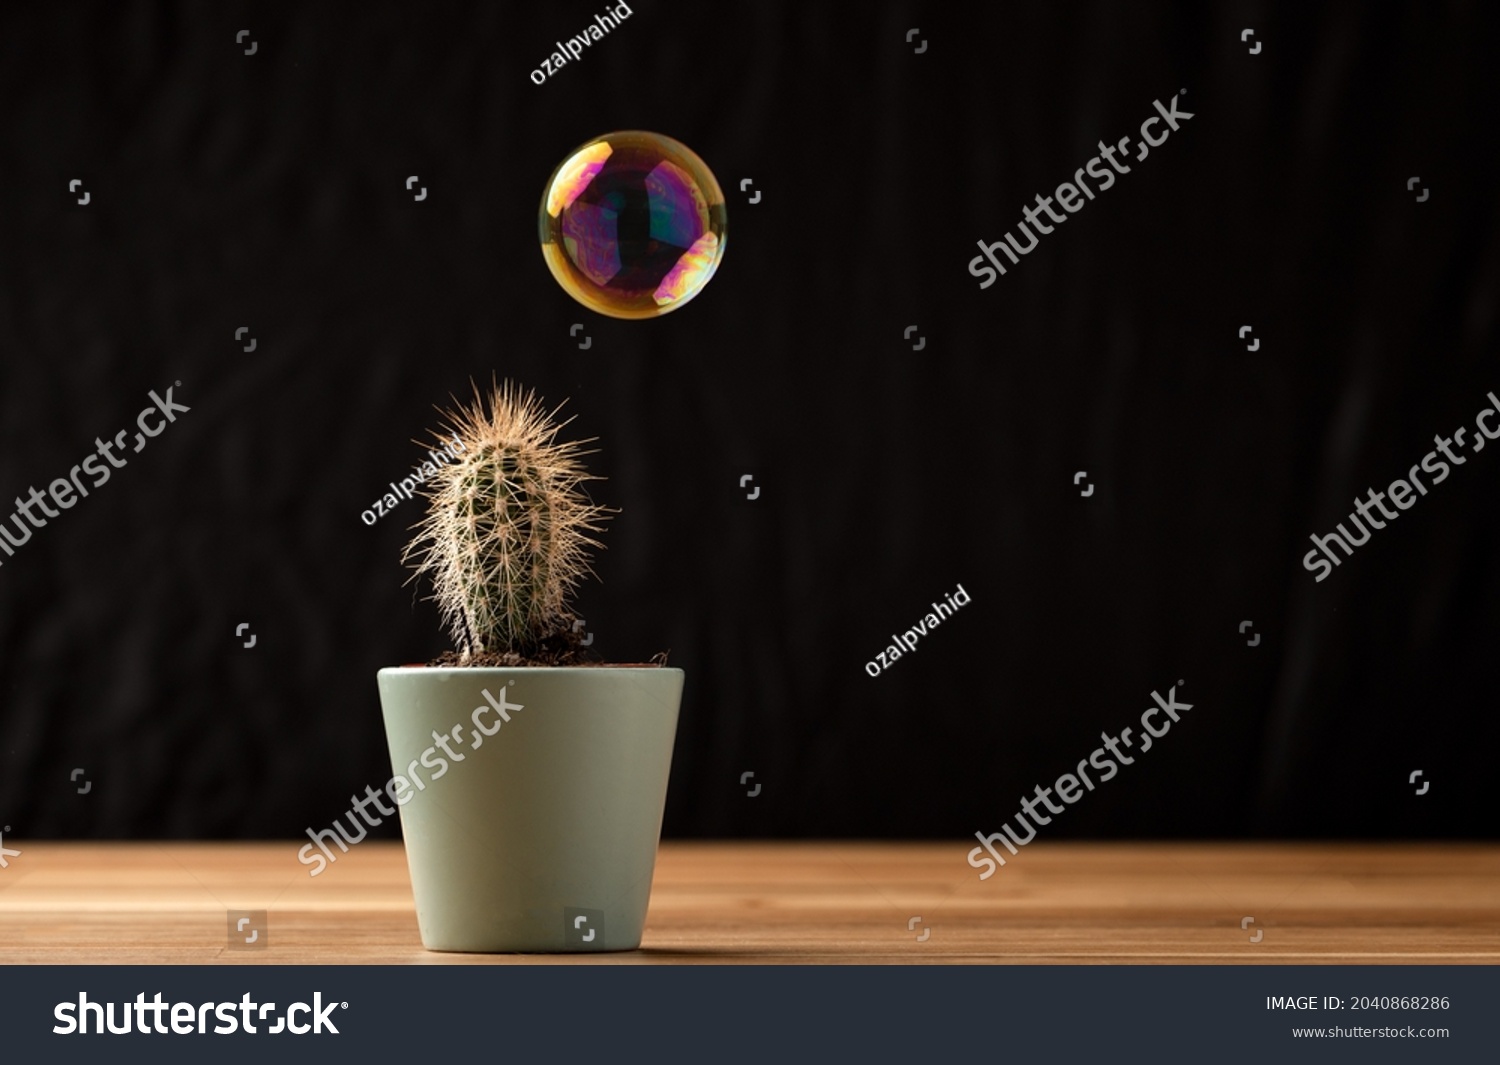 Soap bubble floating on air close to cactus  succullent on black background. Risk, danger, fragility concept. #2040868286